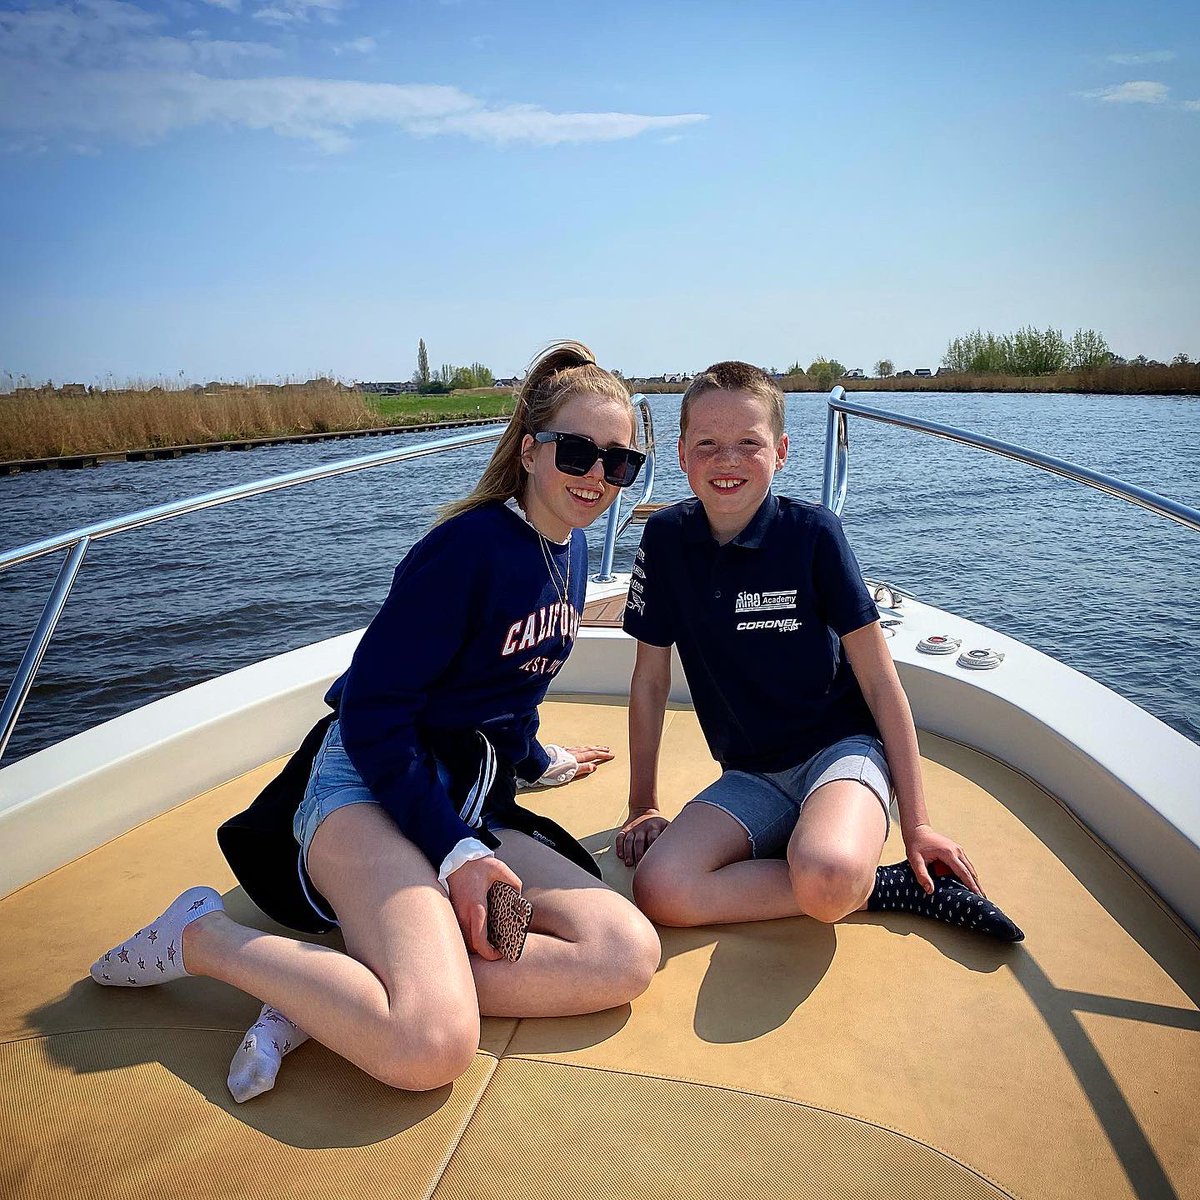 Looking for Easter 🐣 🥚 eggs 😜. A little boat 🚣‍♂️ trip with the family at easter 🐣 to get out of the house 🏡.
Happy Eastern to all of you #racefans.
.
#quarantaine #staysafe #familytime 
#boatrip #eemnes